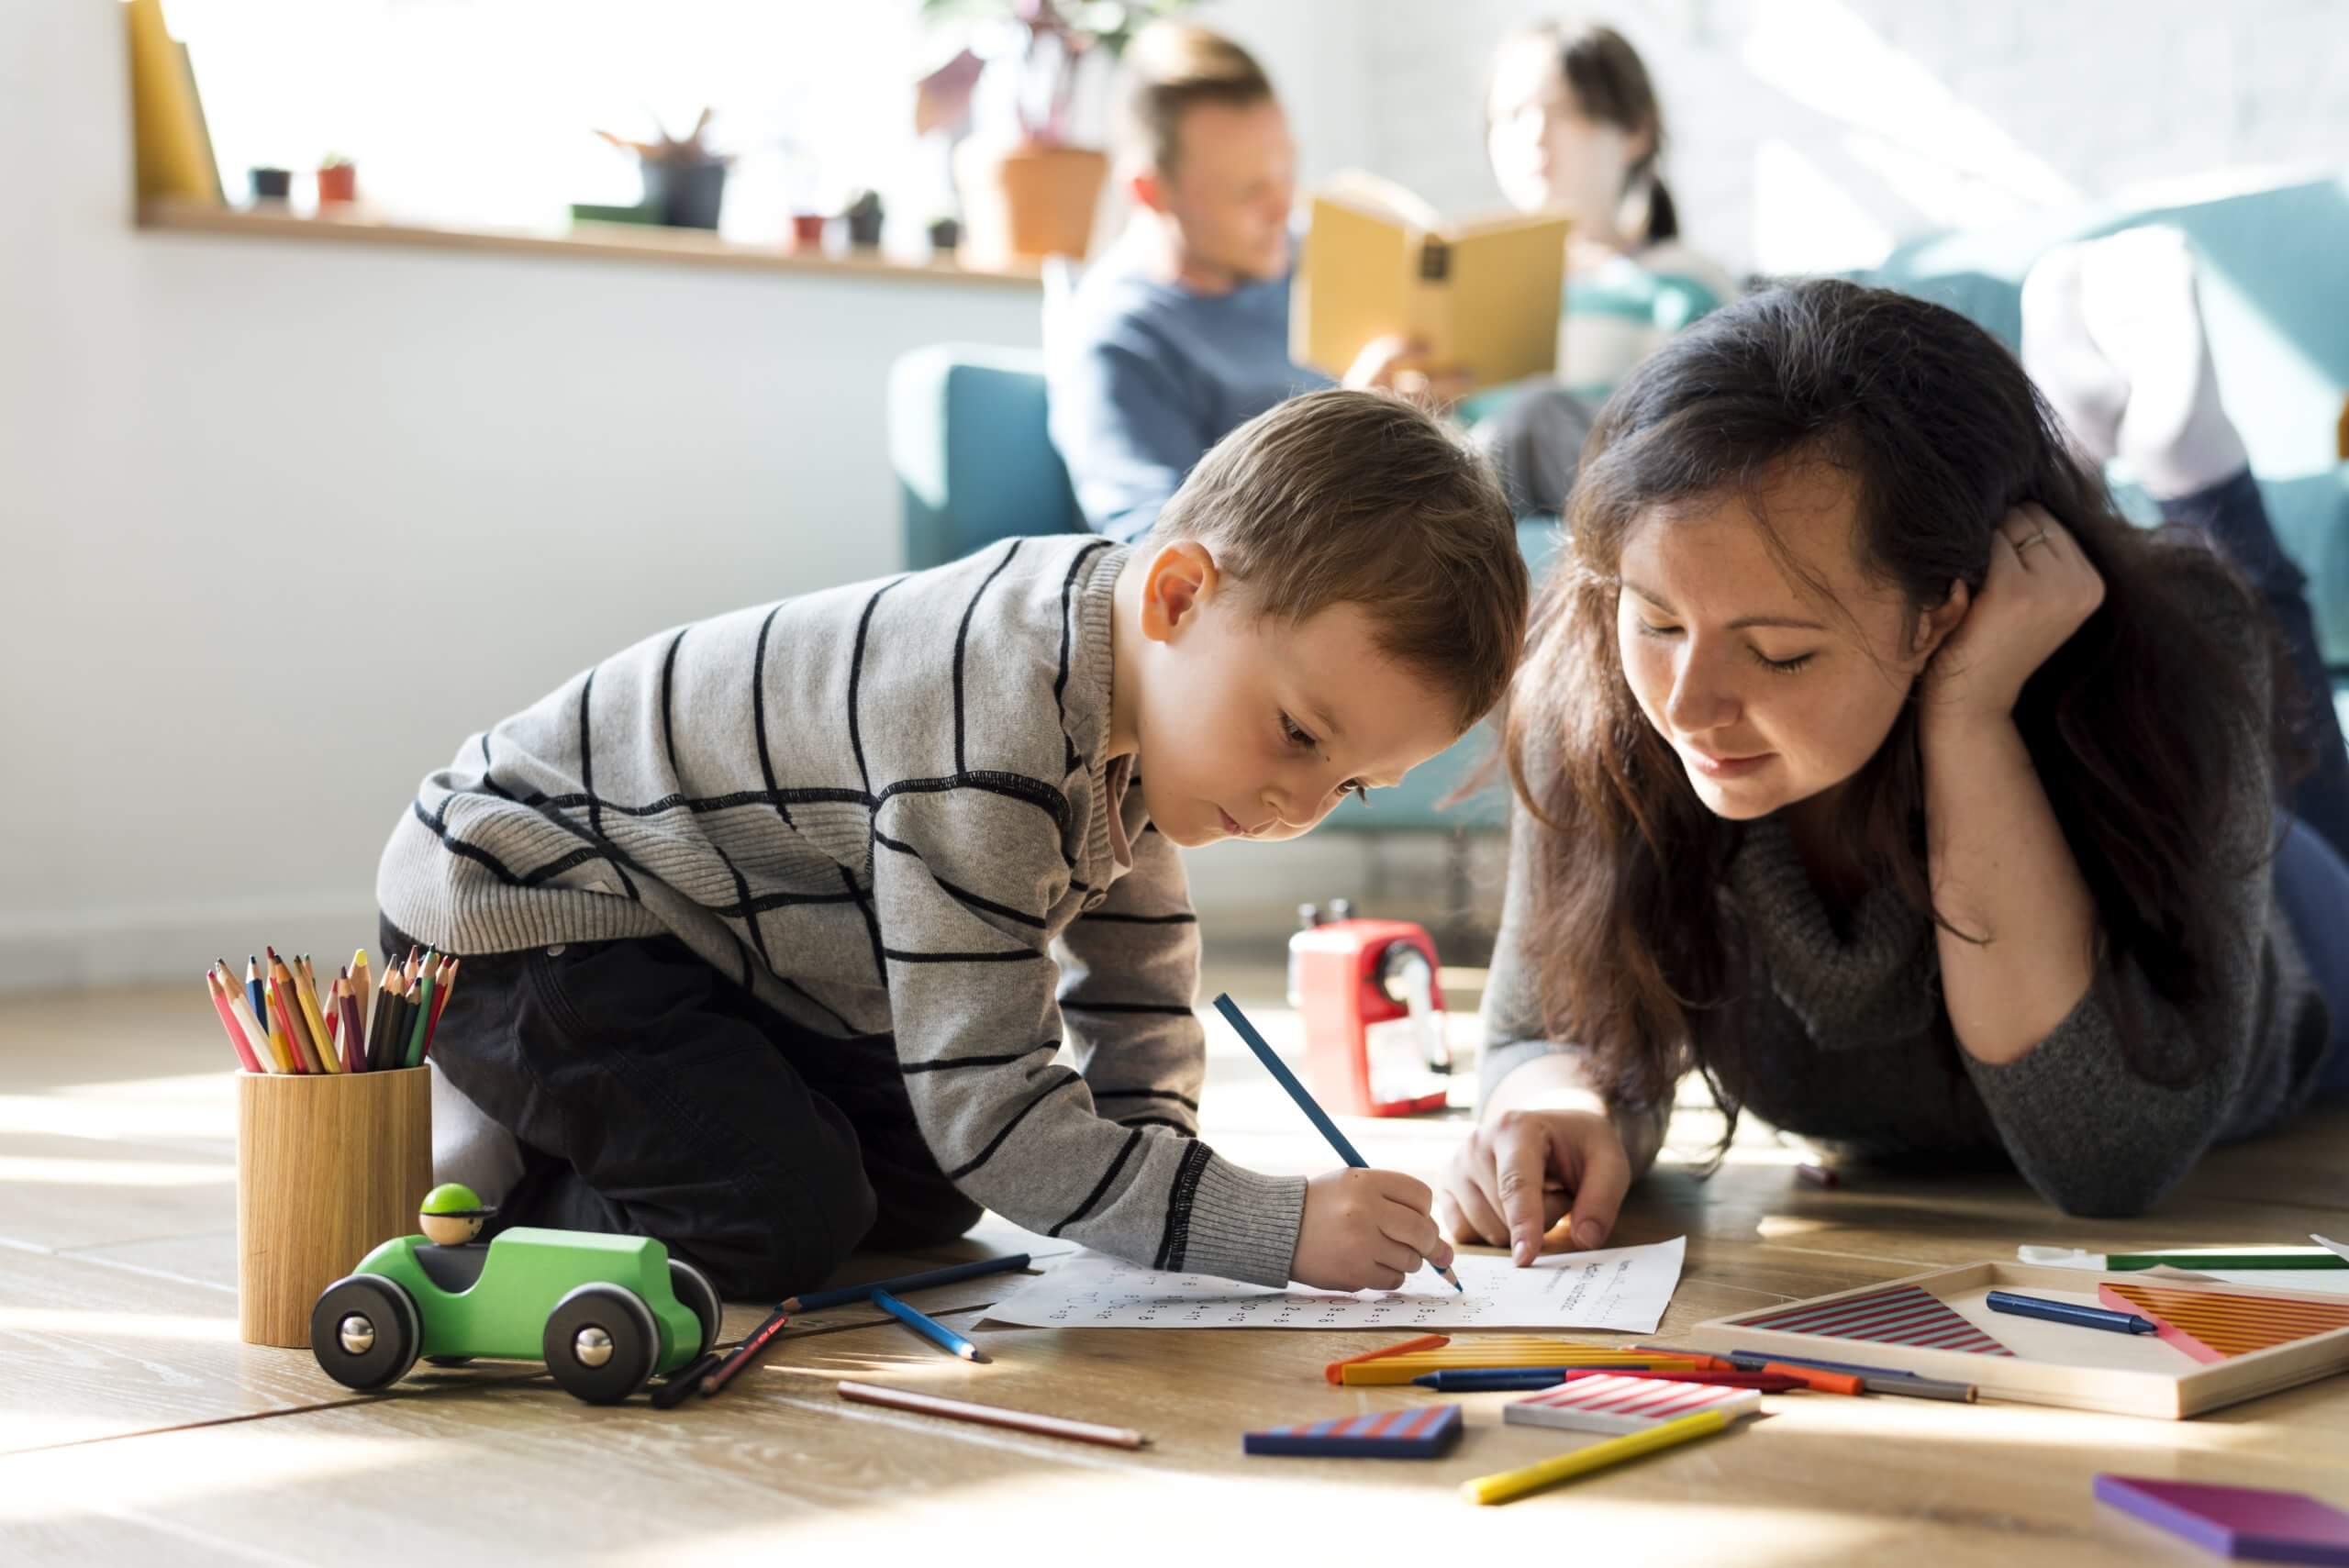 son coloring with mom - learning differently